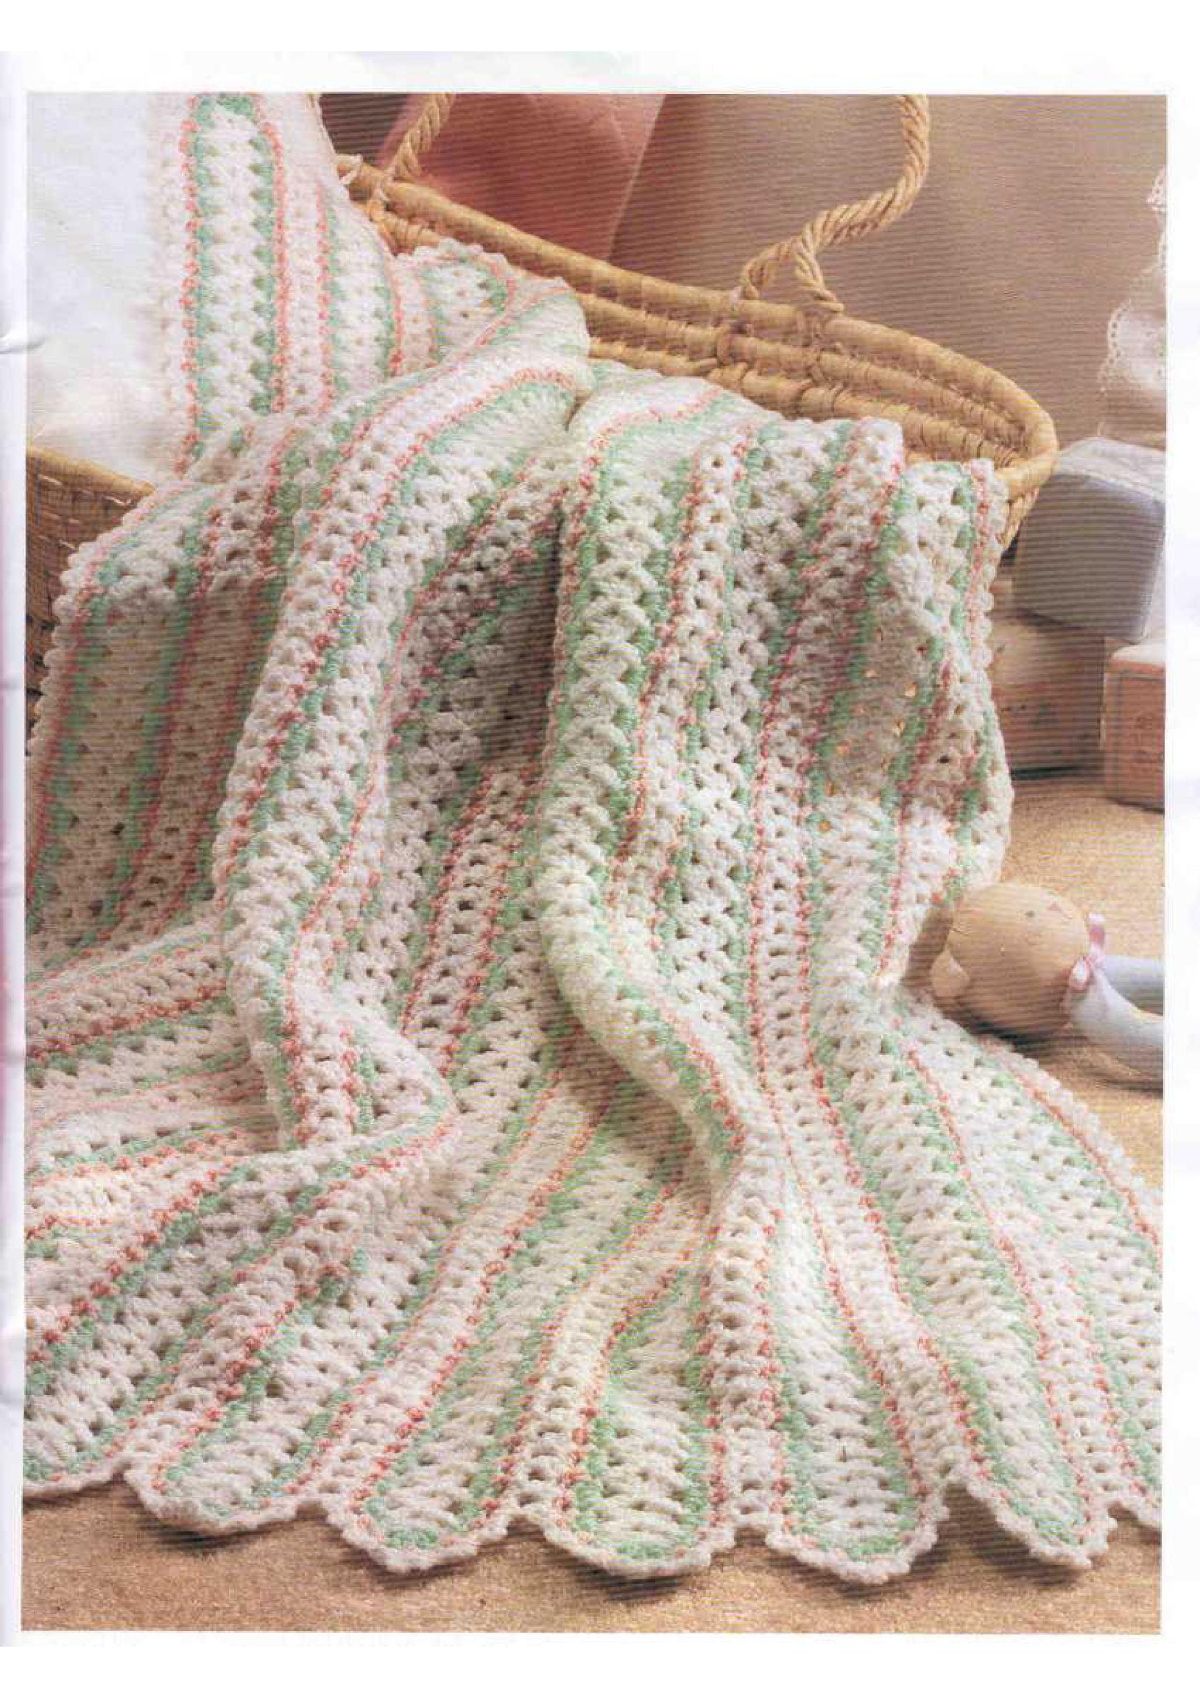 Pale pink, green, and white baby’s afghan with rounded edges spilling out of a brown basket onto the floor. 